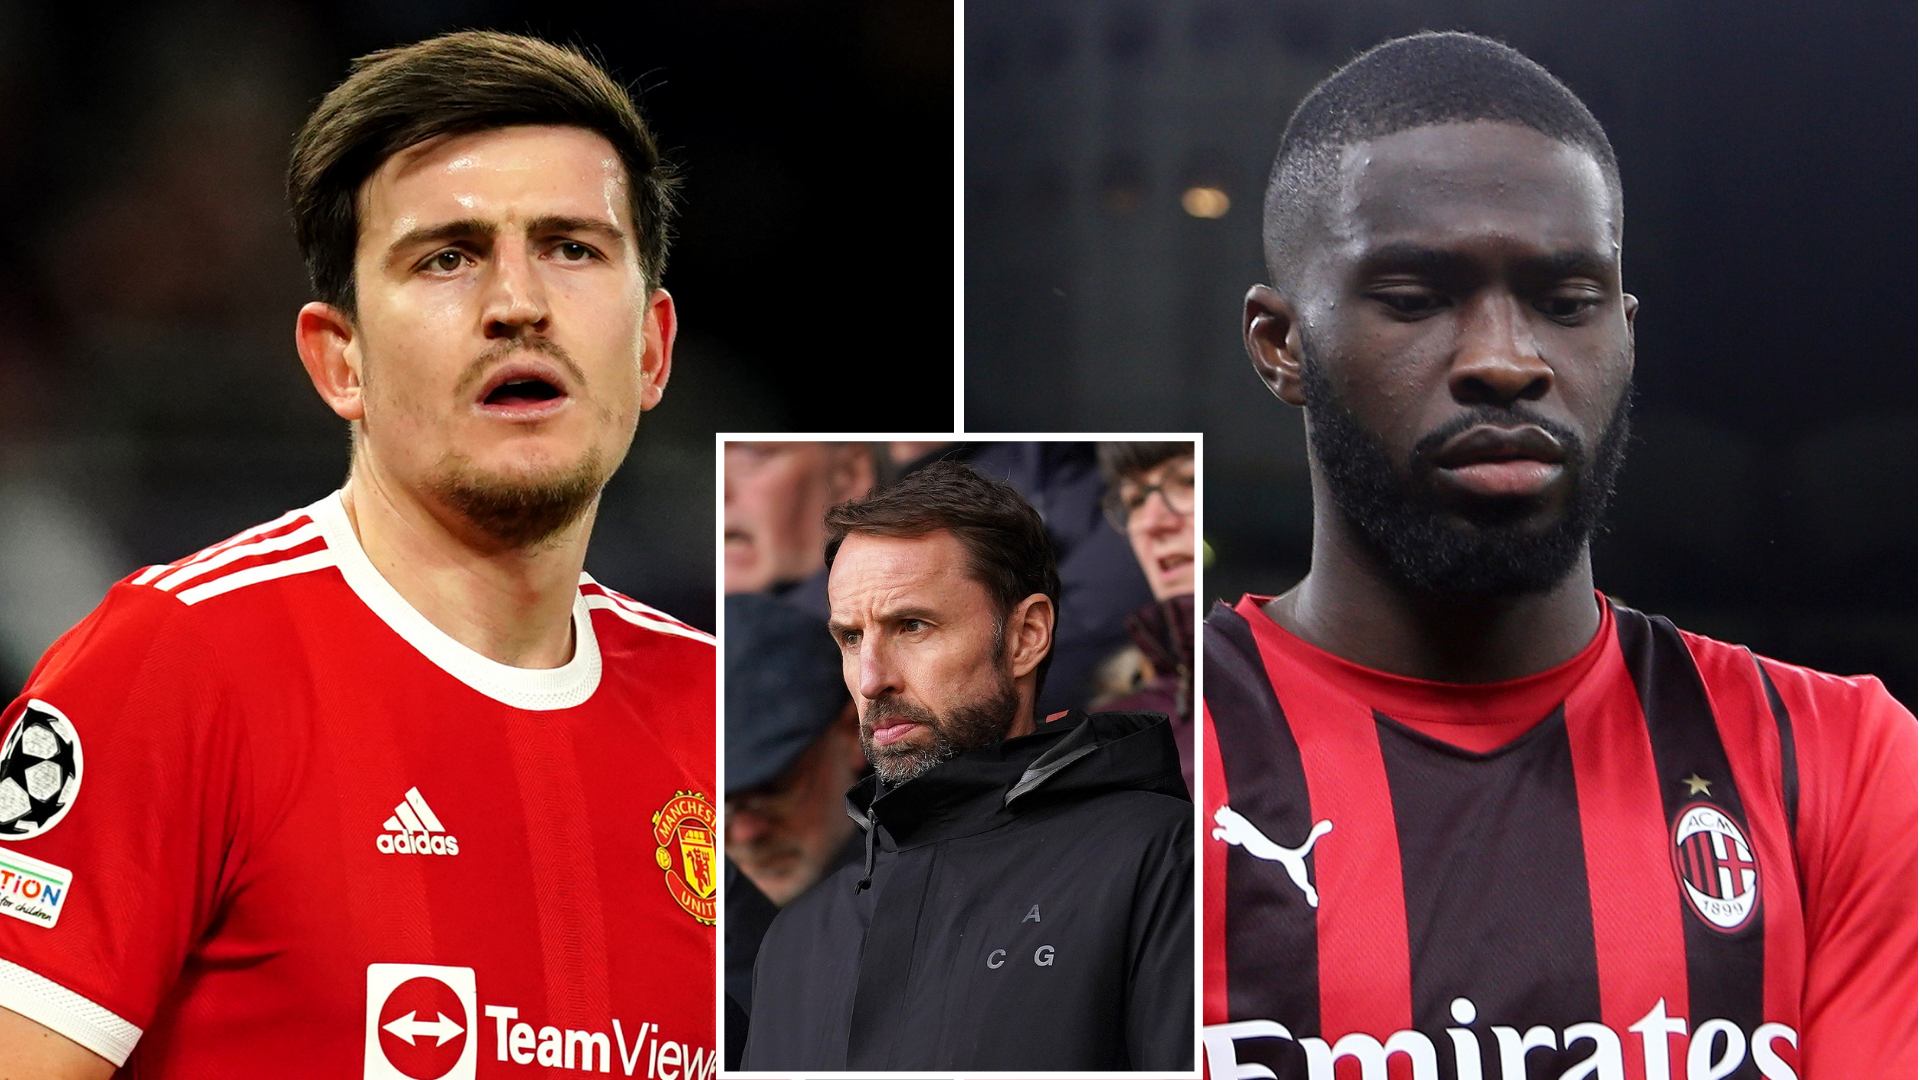 Exactly why it should be his last season at United': Fans criticize Maguire  for poor moment in Italy clash - Football